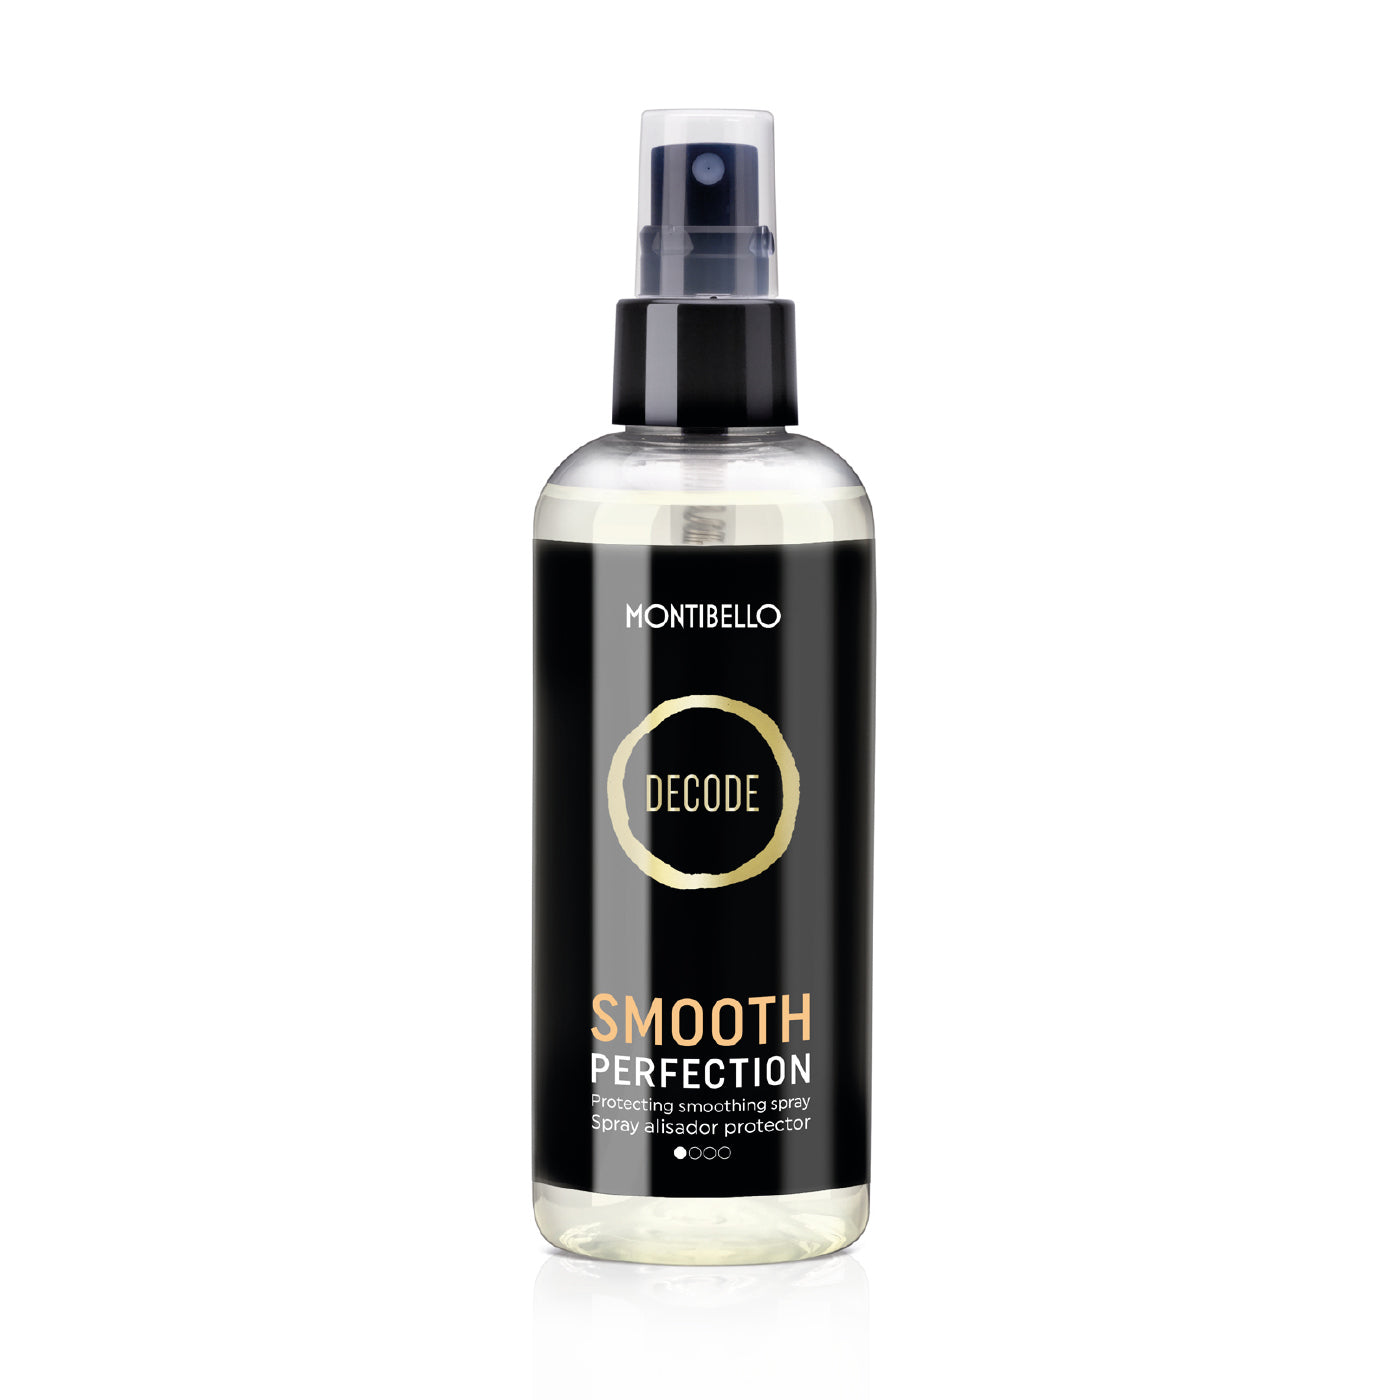 Montibello Decode Smooth Perfection (200ml) - Ultimate Hair and Beauty